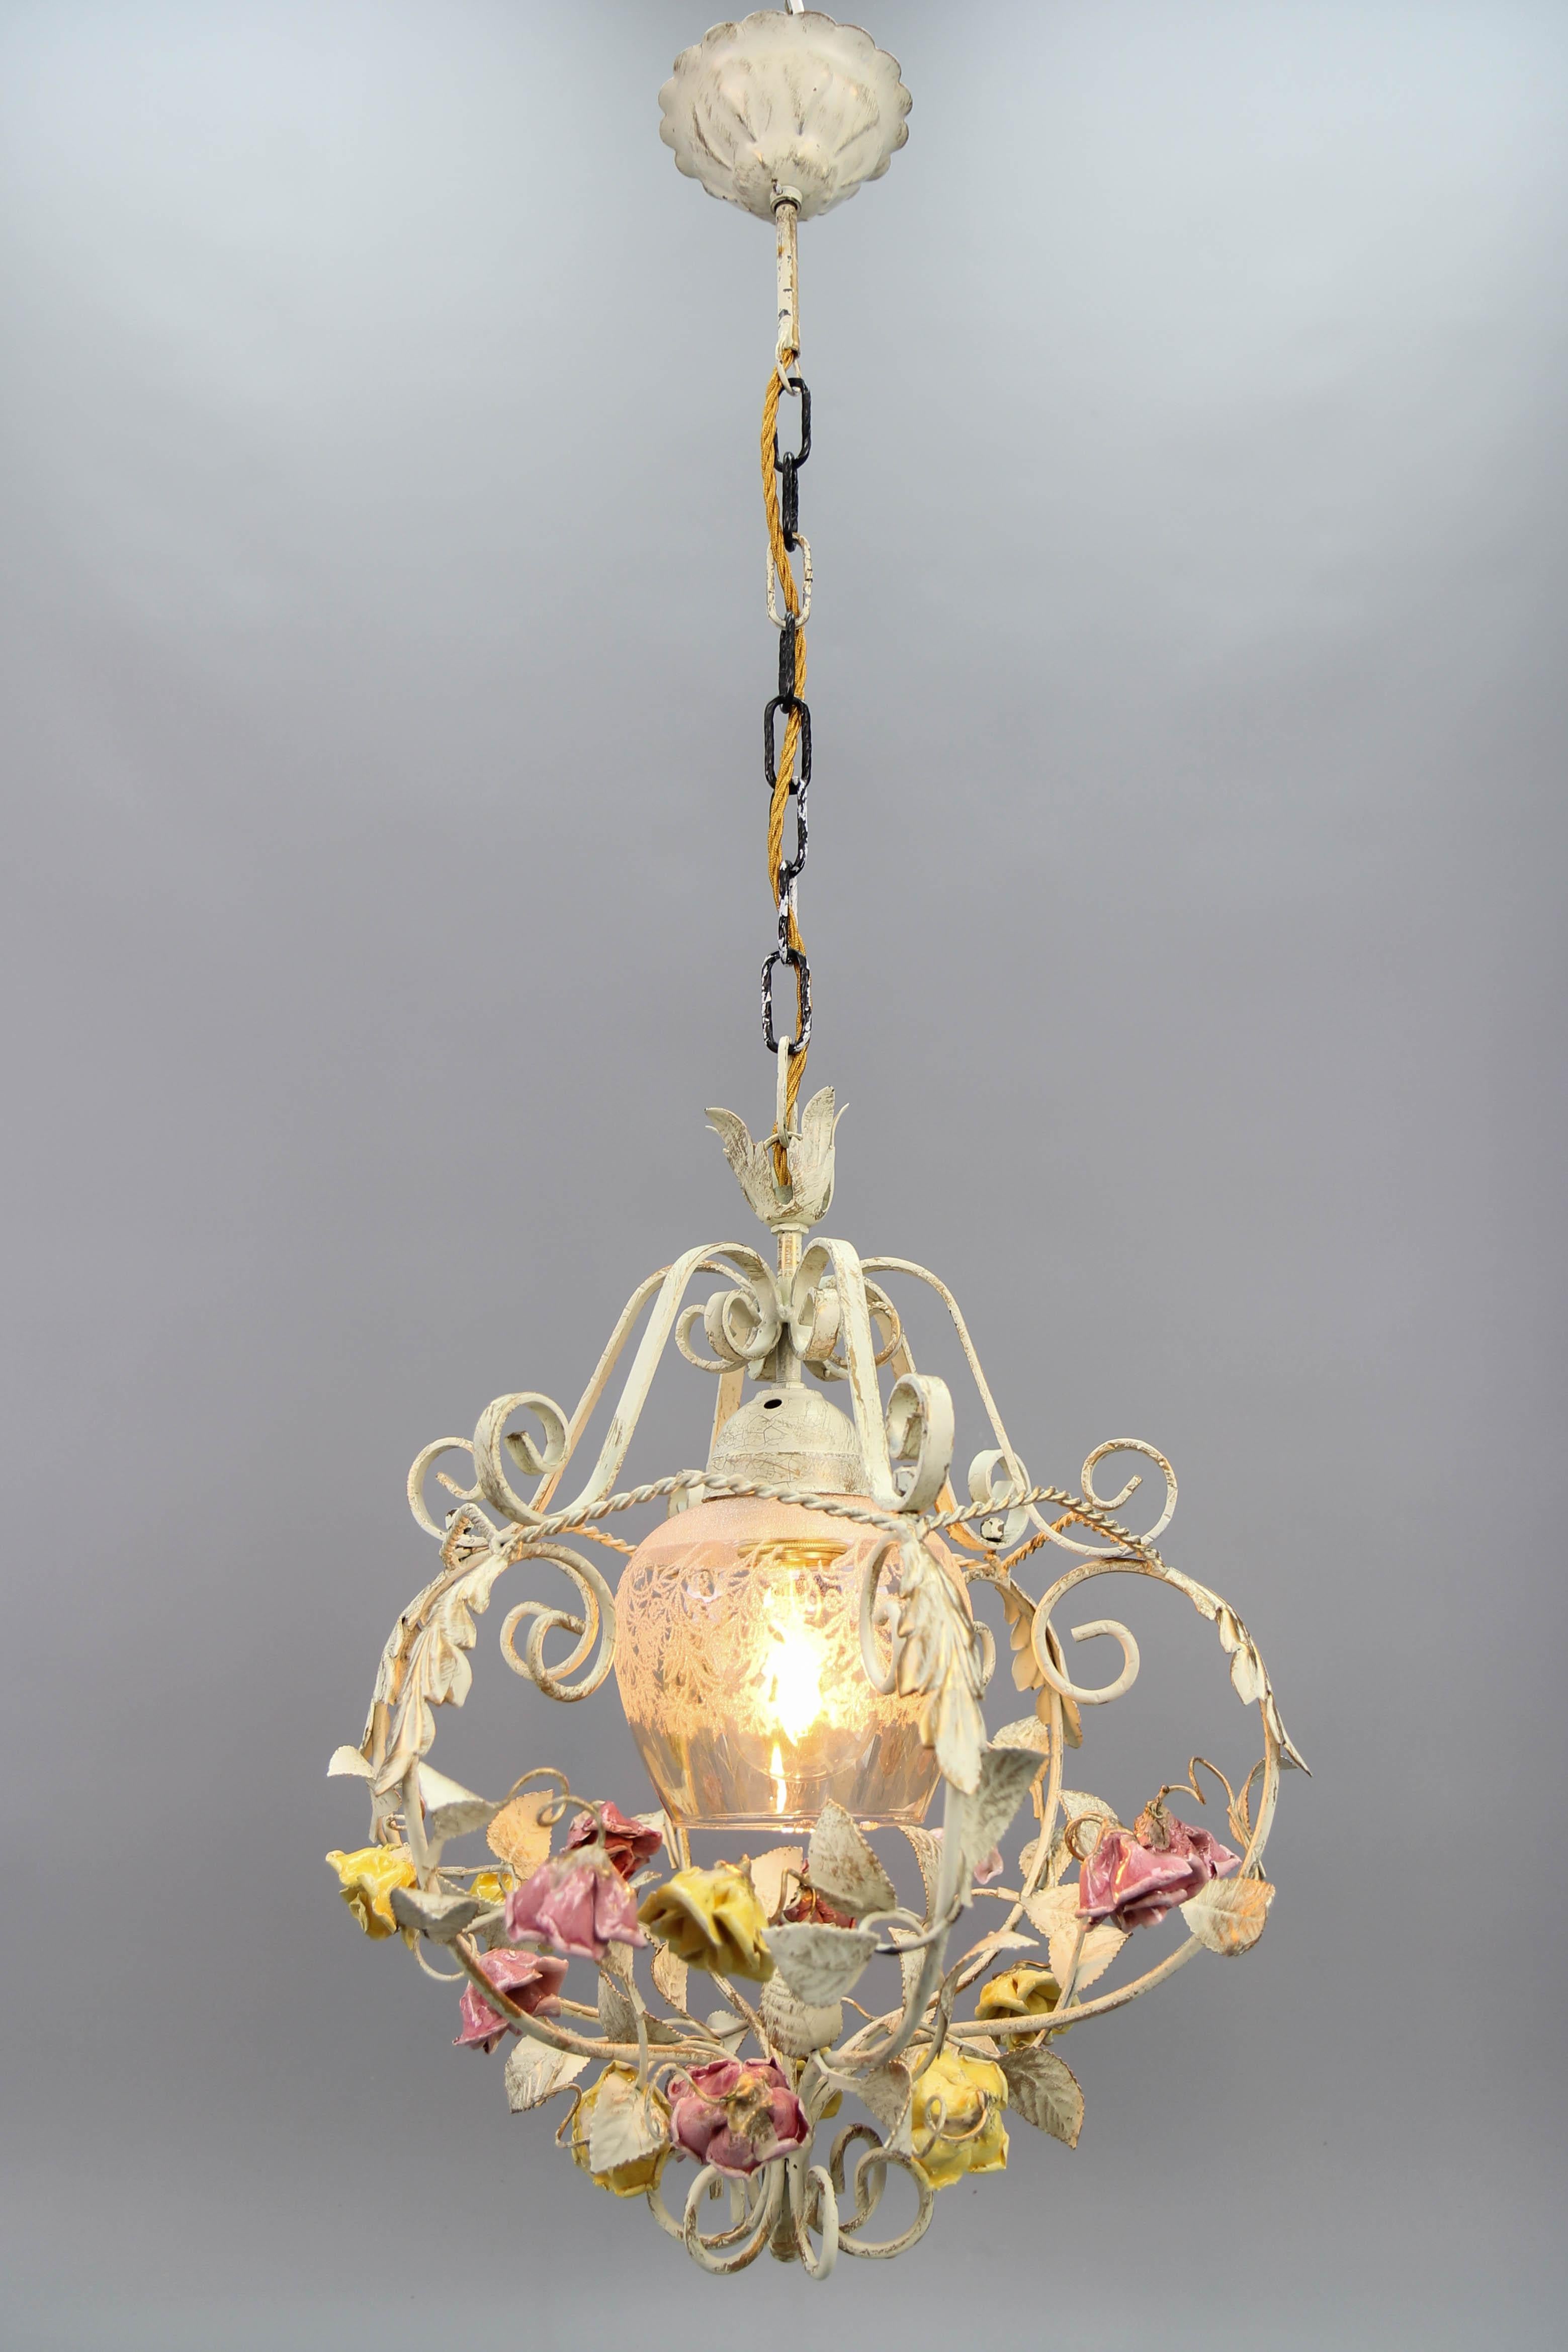 Hollywood Regency Style Metal and Glass Chandelier with Porcelain Roses, 1970s For Sale 2